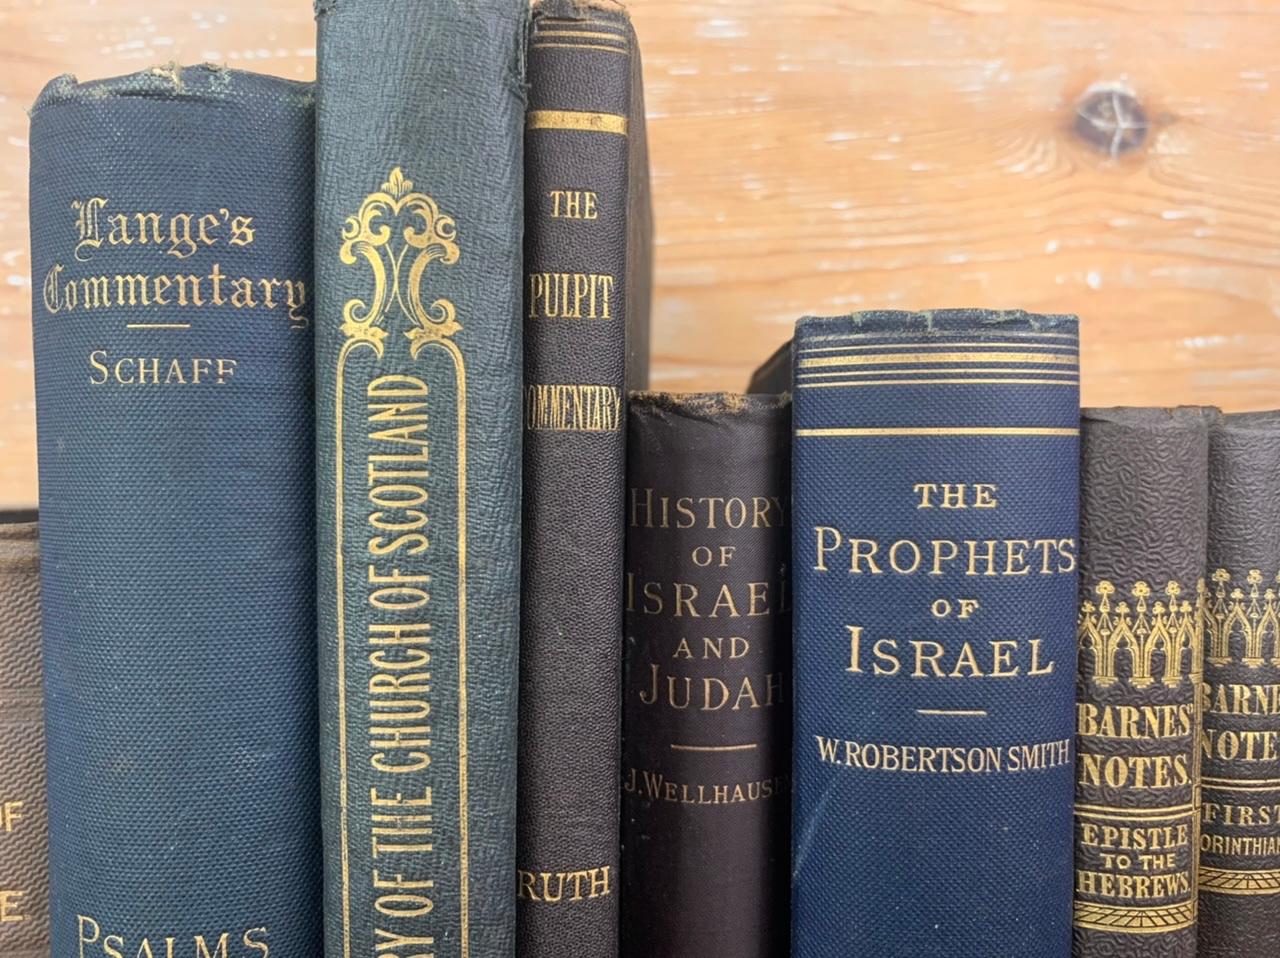 Many books on various subjects such as the church of Scoltand or the history of Israel. Set of old books dating from the 19th century. From an old protestant library near Le Havre in France. These beautiful books are perfect to fill a nice library.